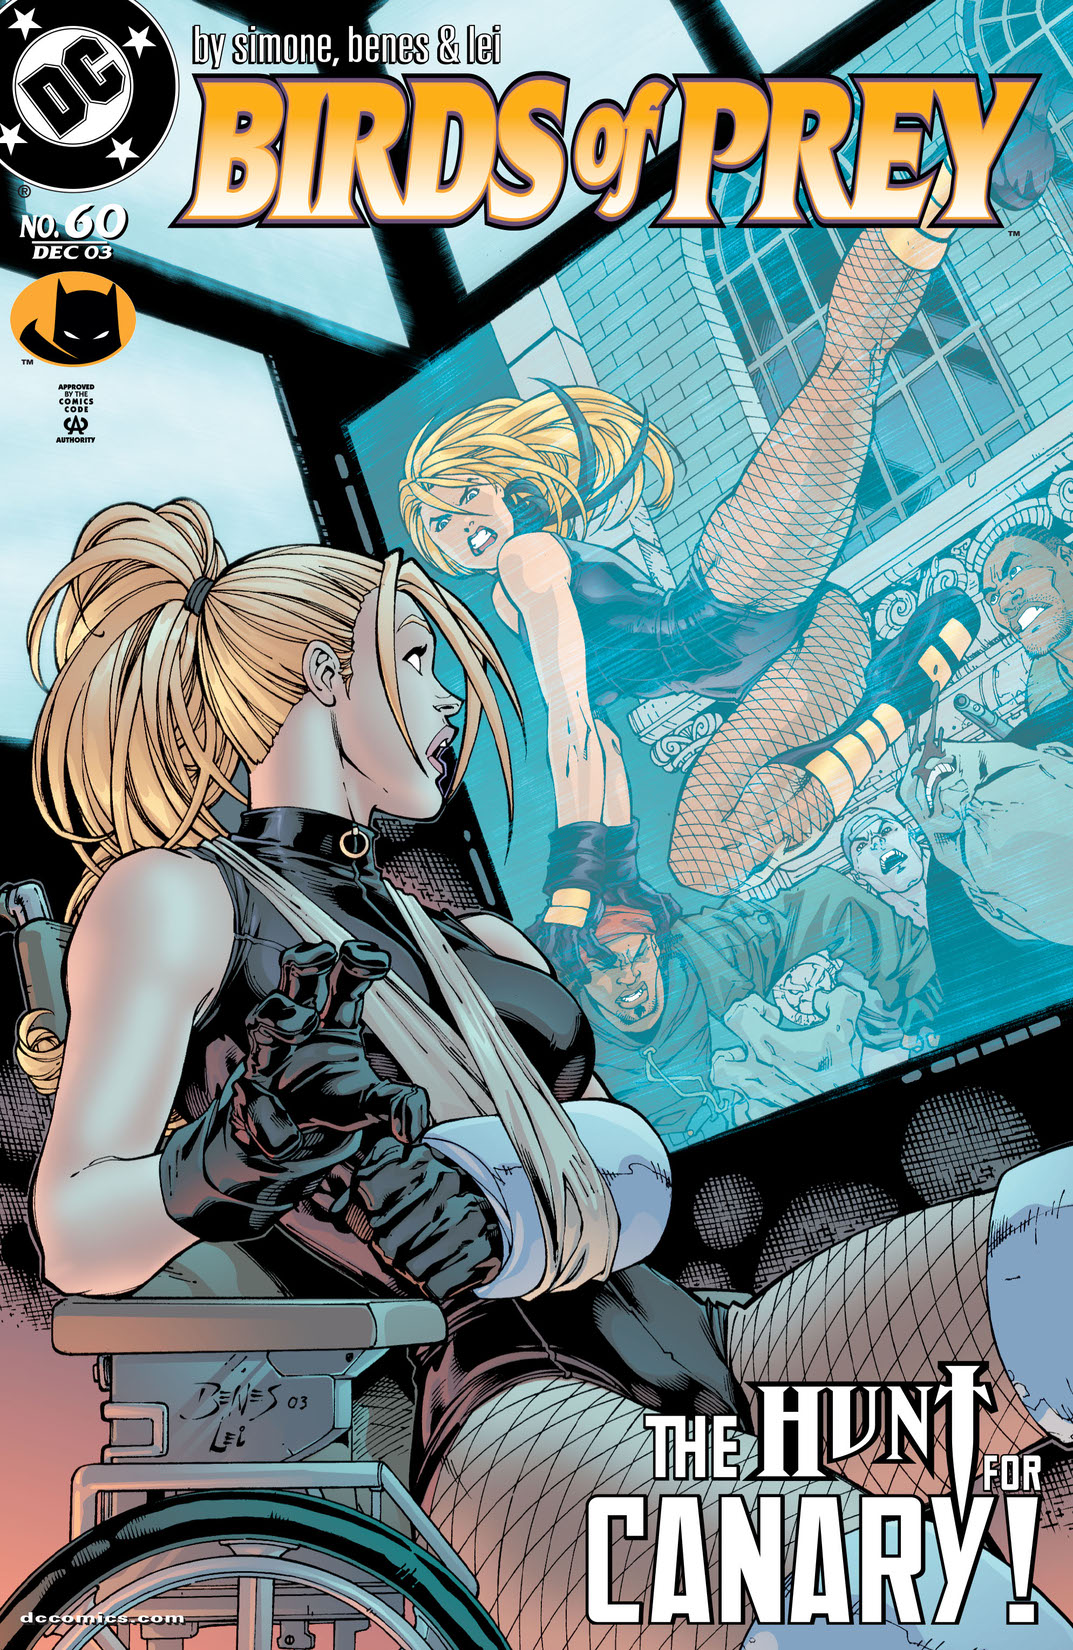 Birds of Prey () #60 preview images